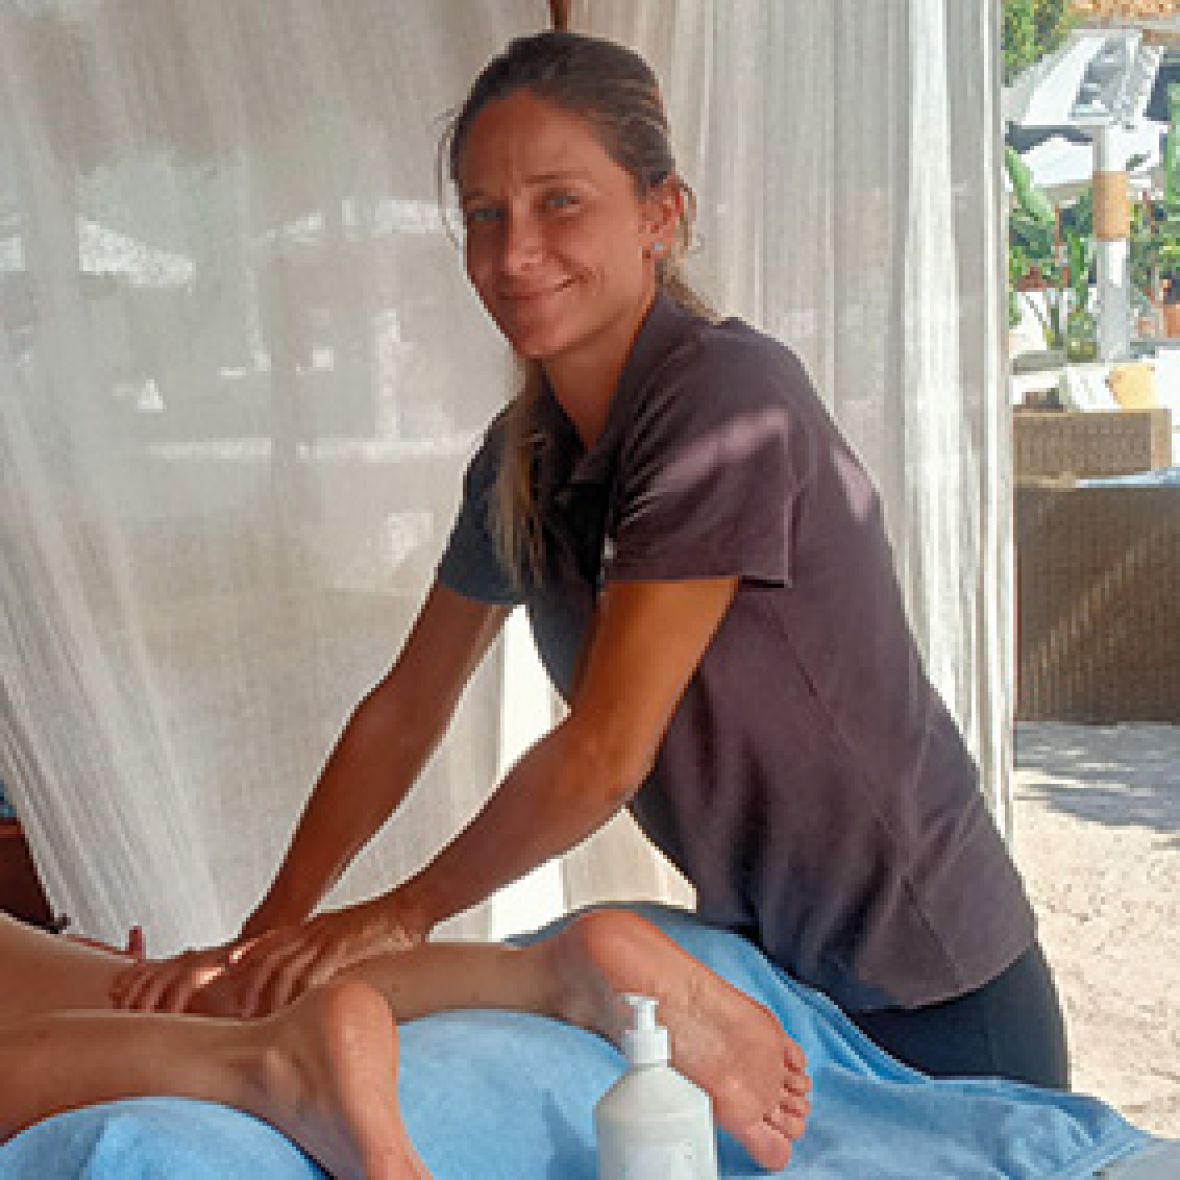 Massage and Spa jobs abroad